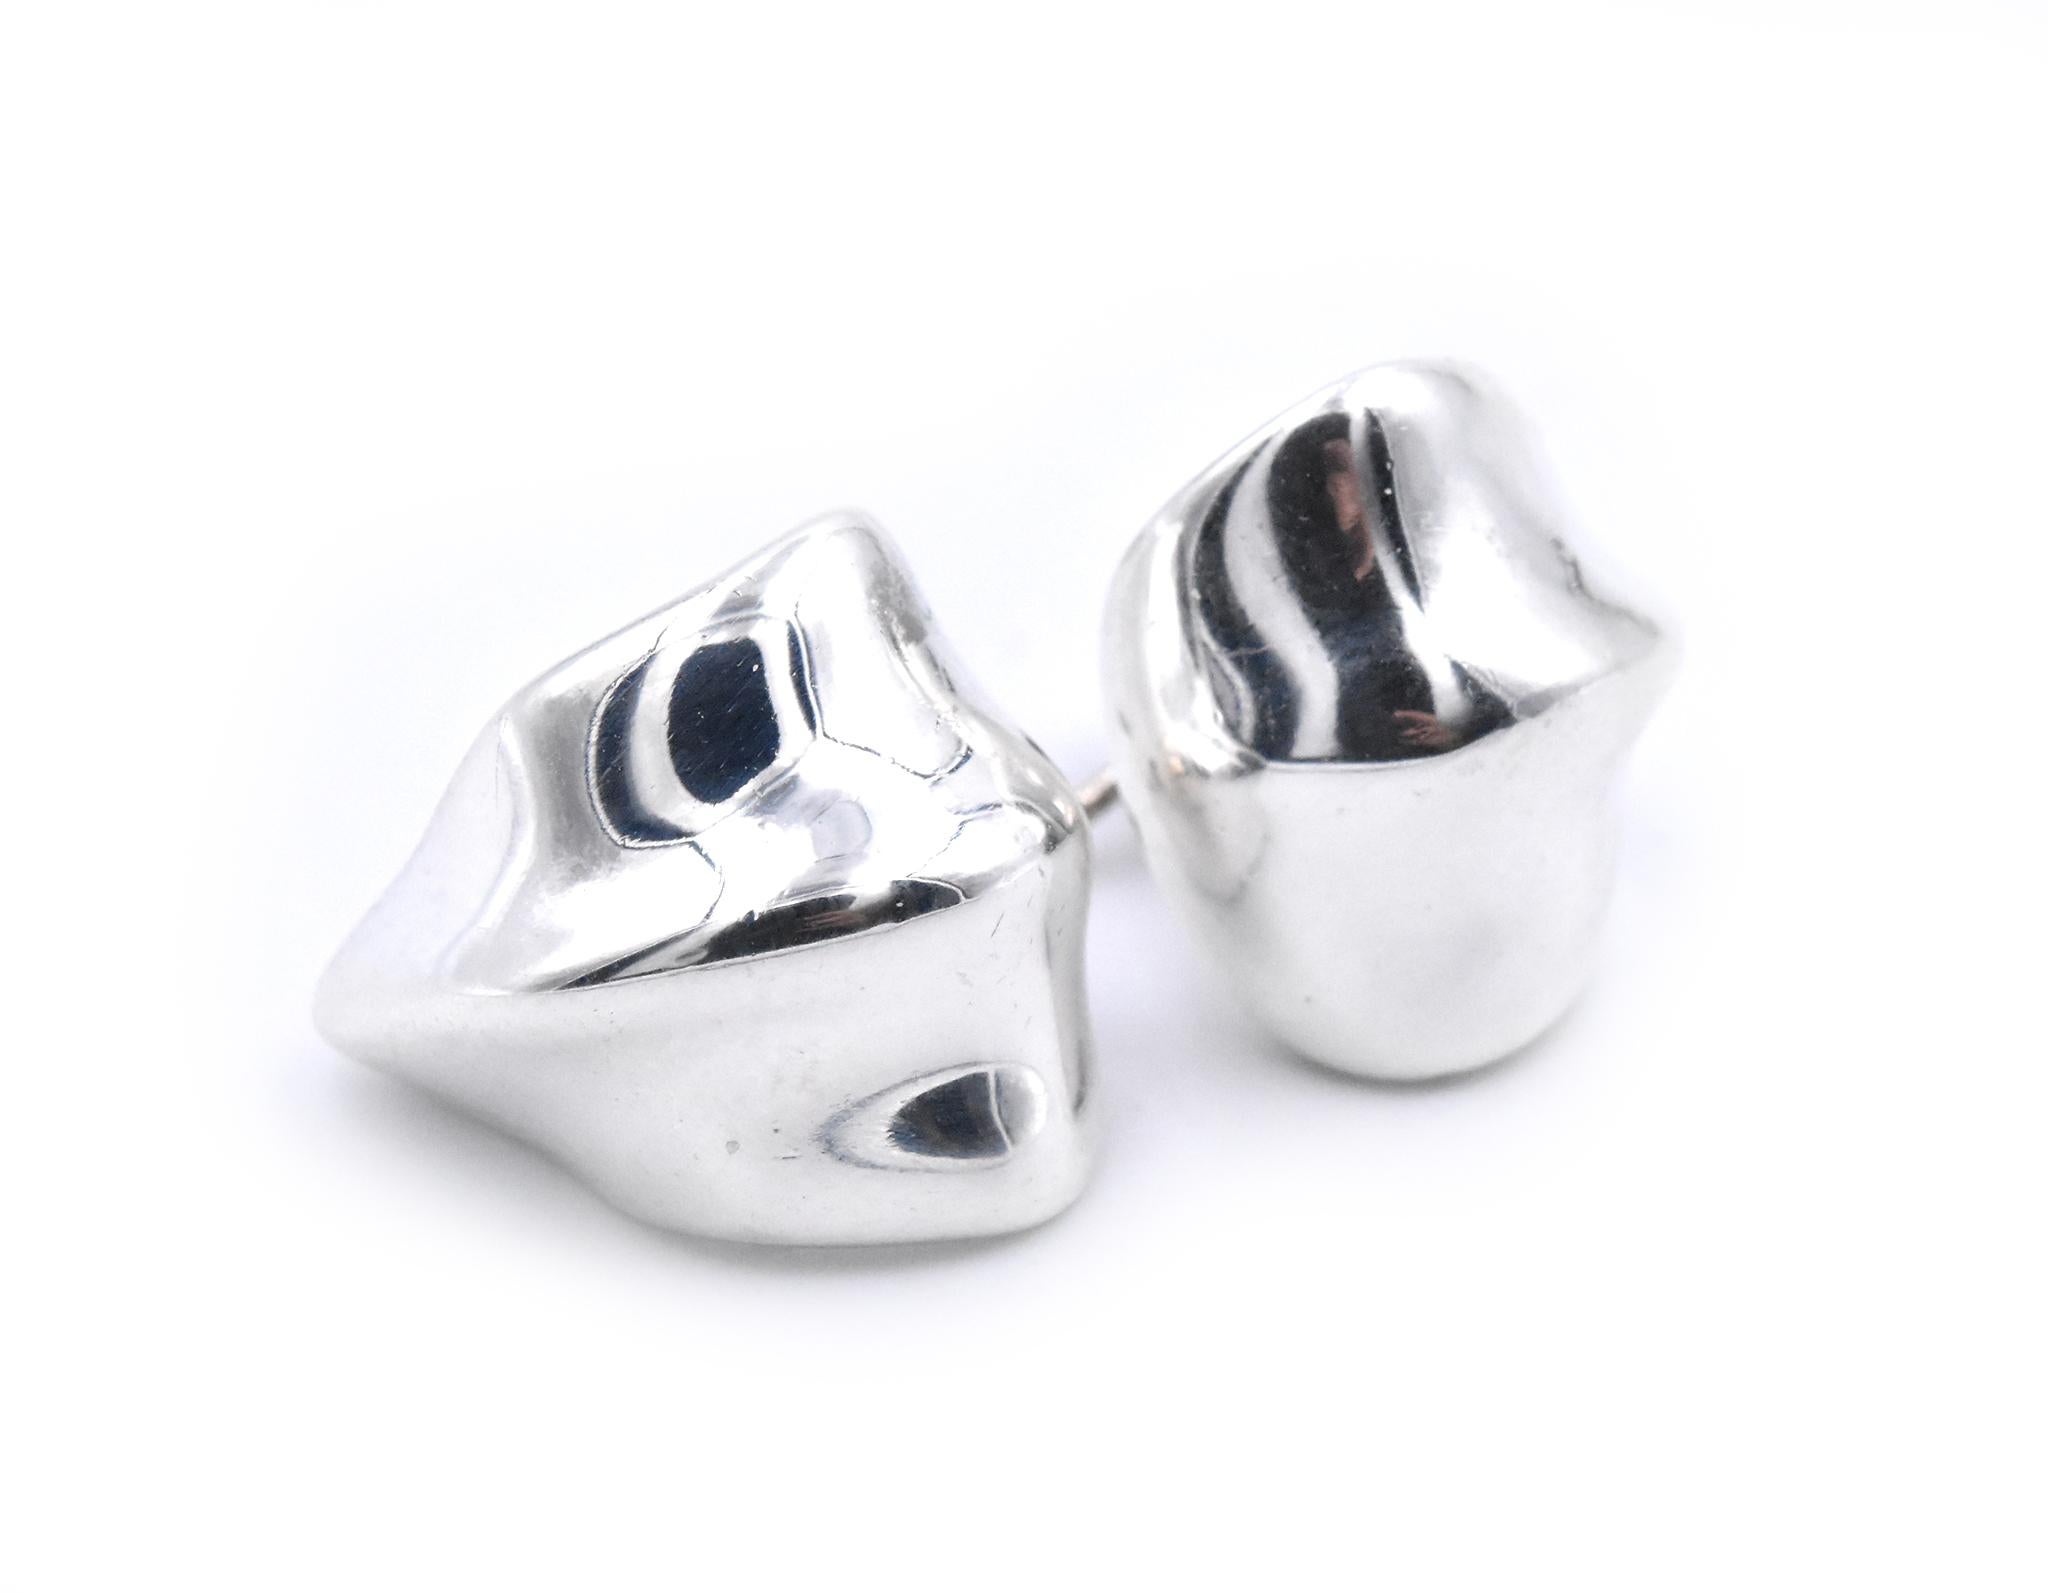 Designer: Tiffany & Co.
Material: sterling silver
Dimensions: earrings measure 16.41mm X 14.61mm
Weight: 7.39 grams